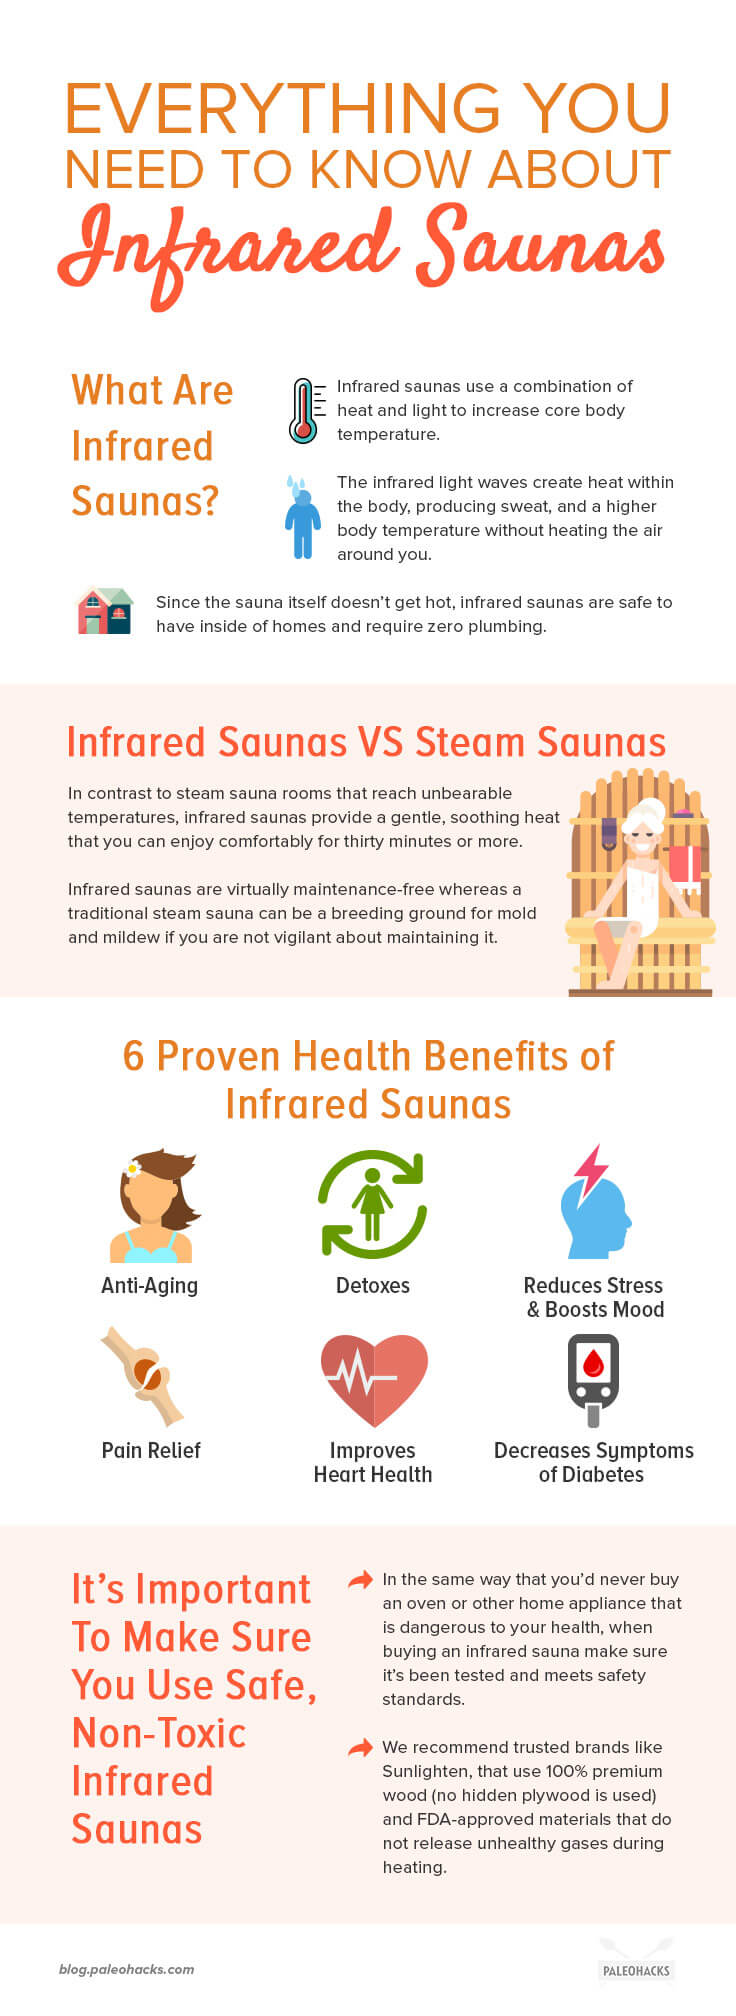 With the advent of modern technology, infrared saunas have become a safer, affordable, and easily-accessible option for those who desire an in-home sauna.